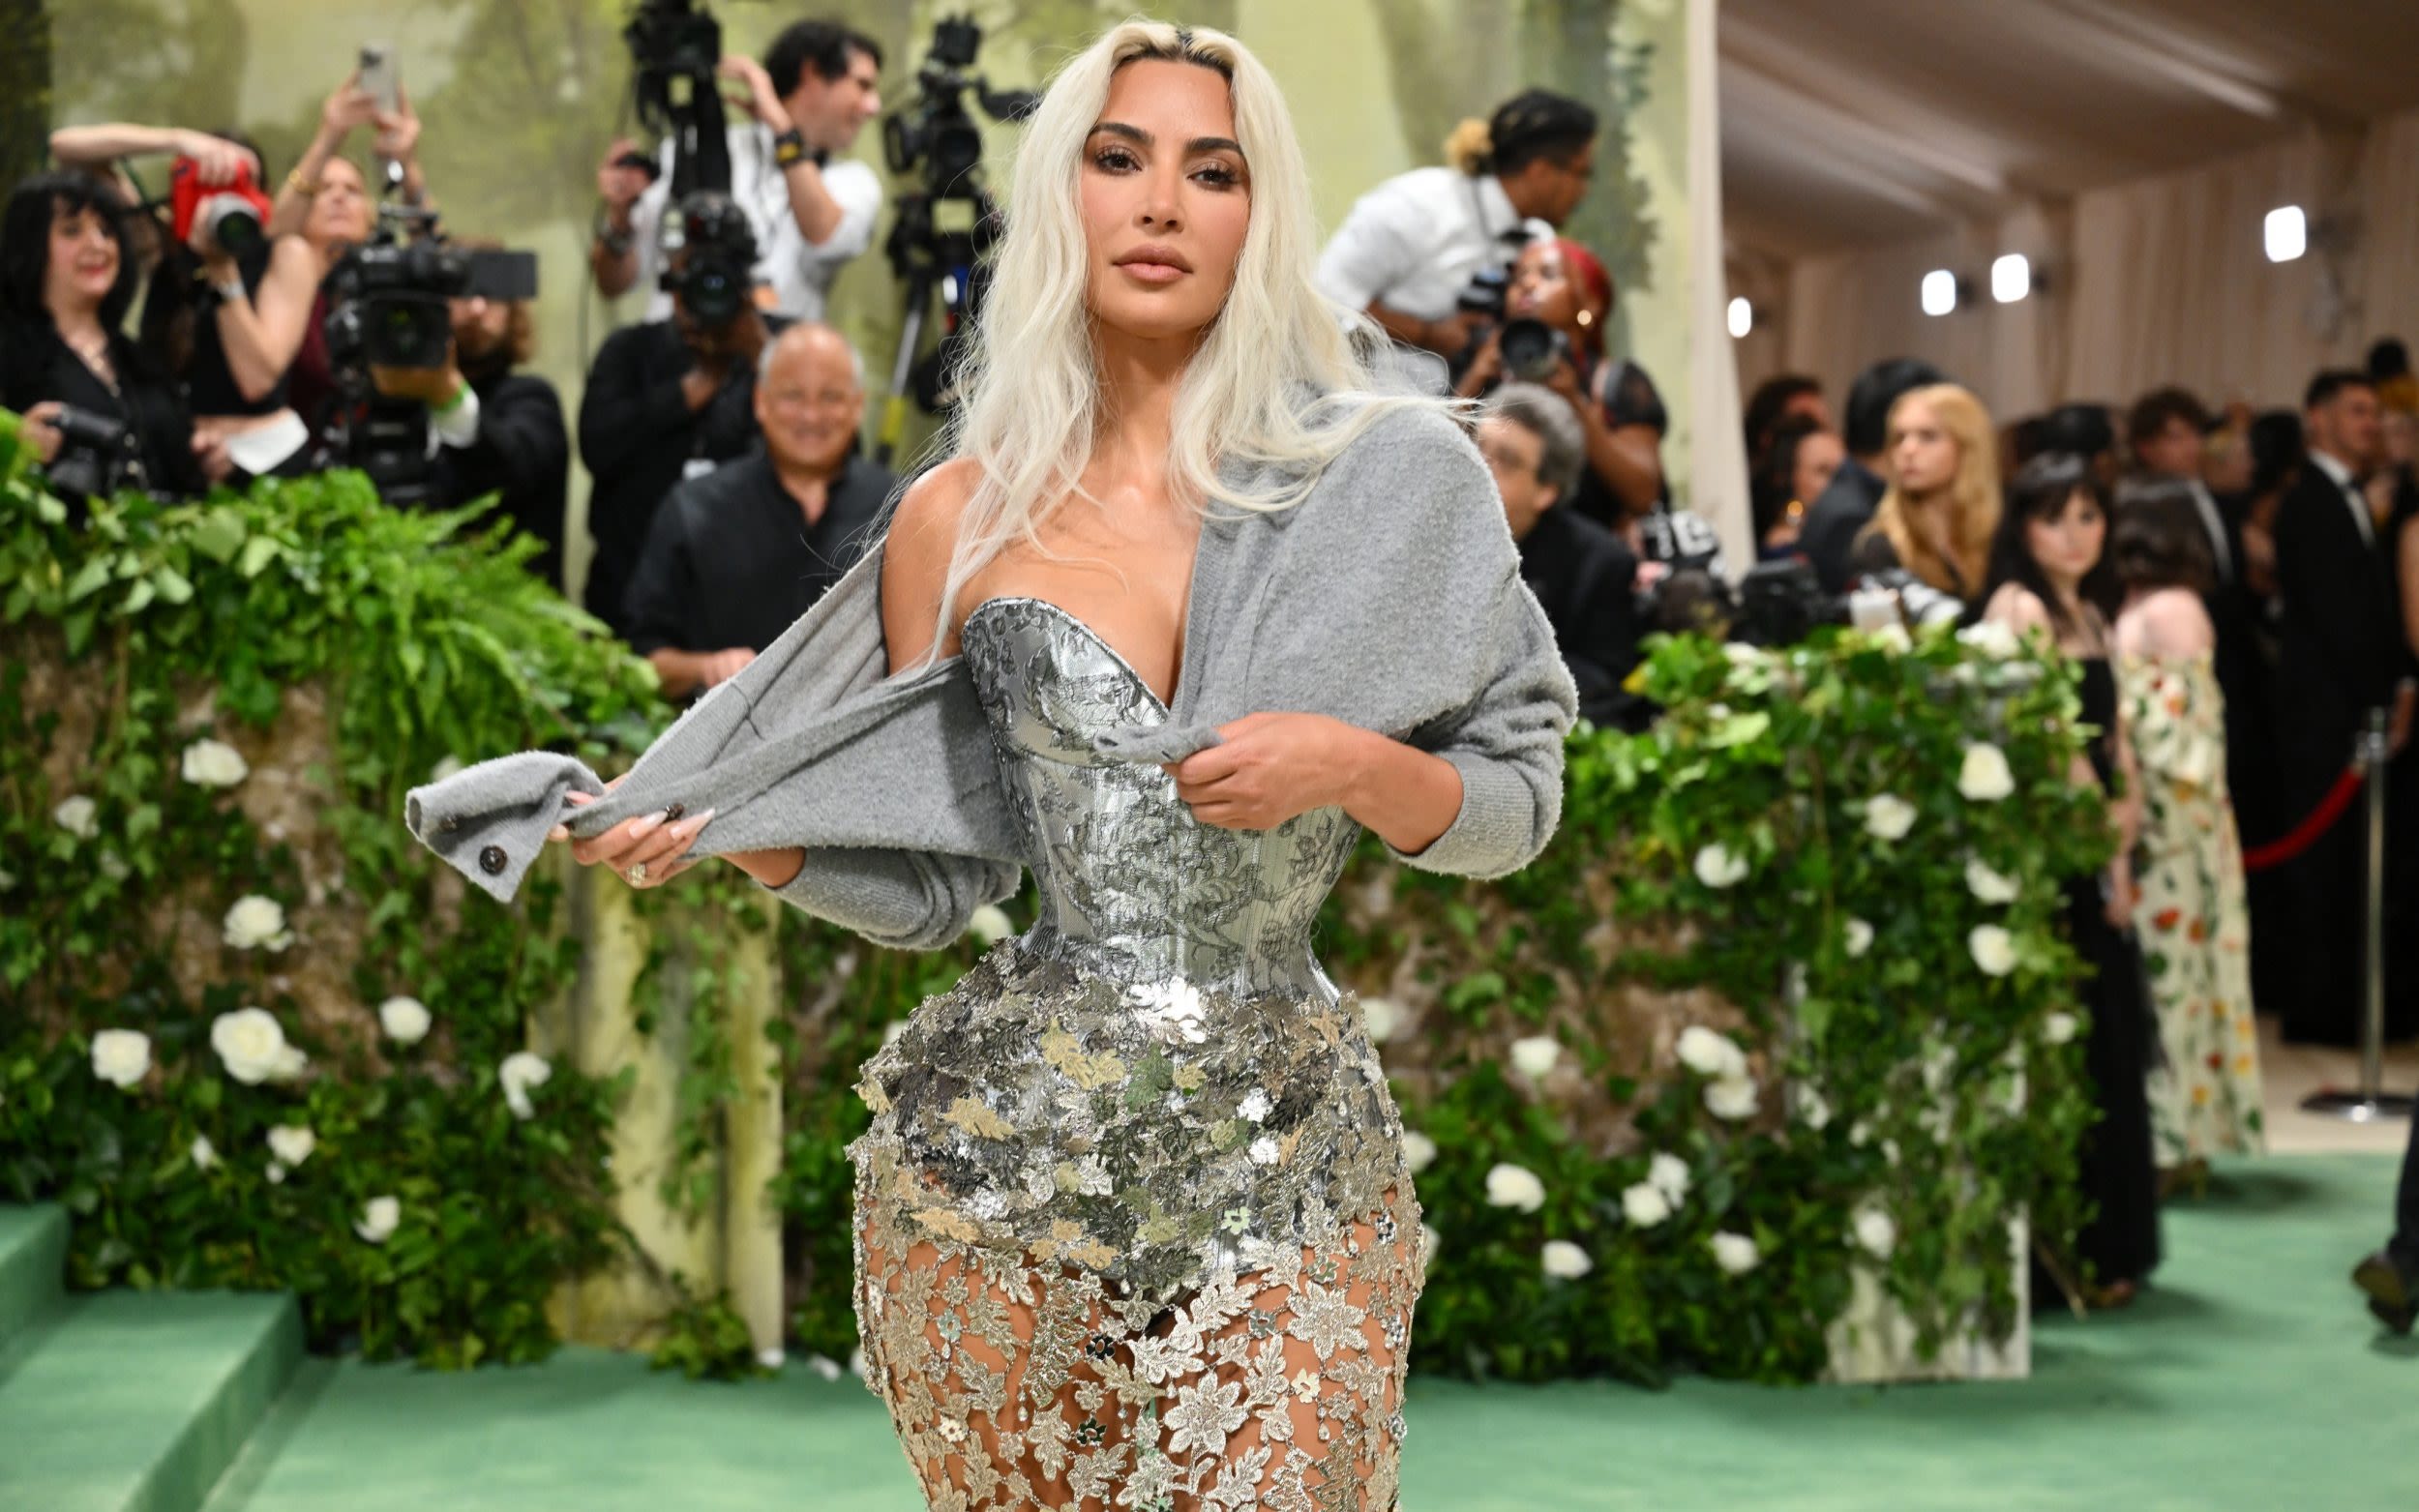 Met Gala fashion faux pas – from Kardashians in cardigans to soggy T-shirts